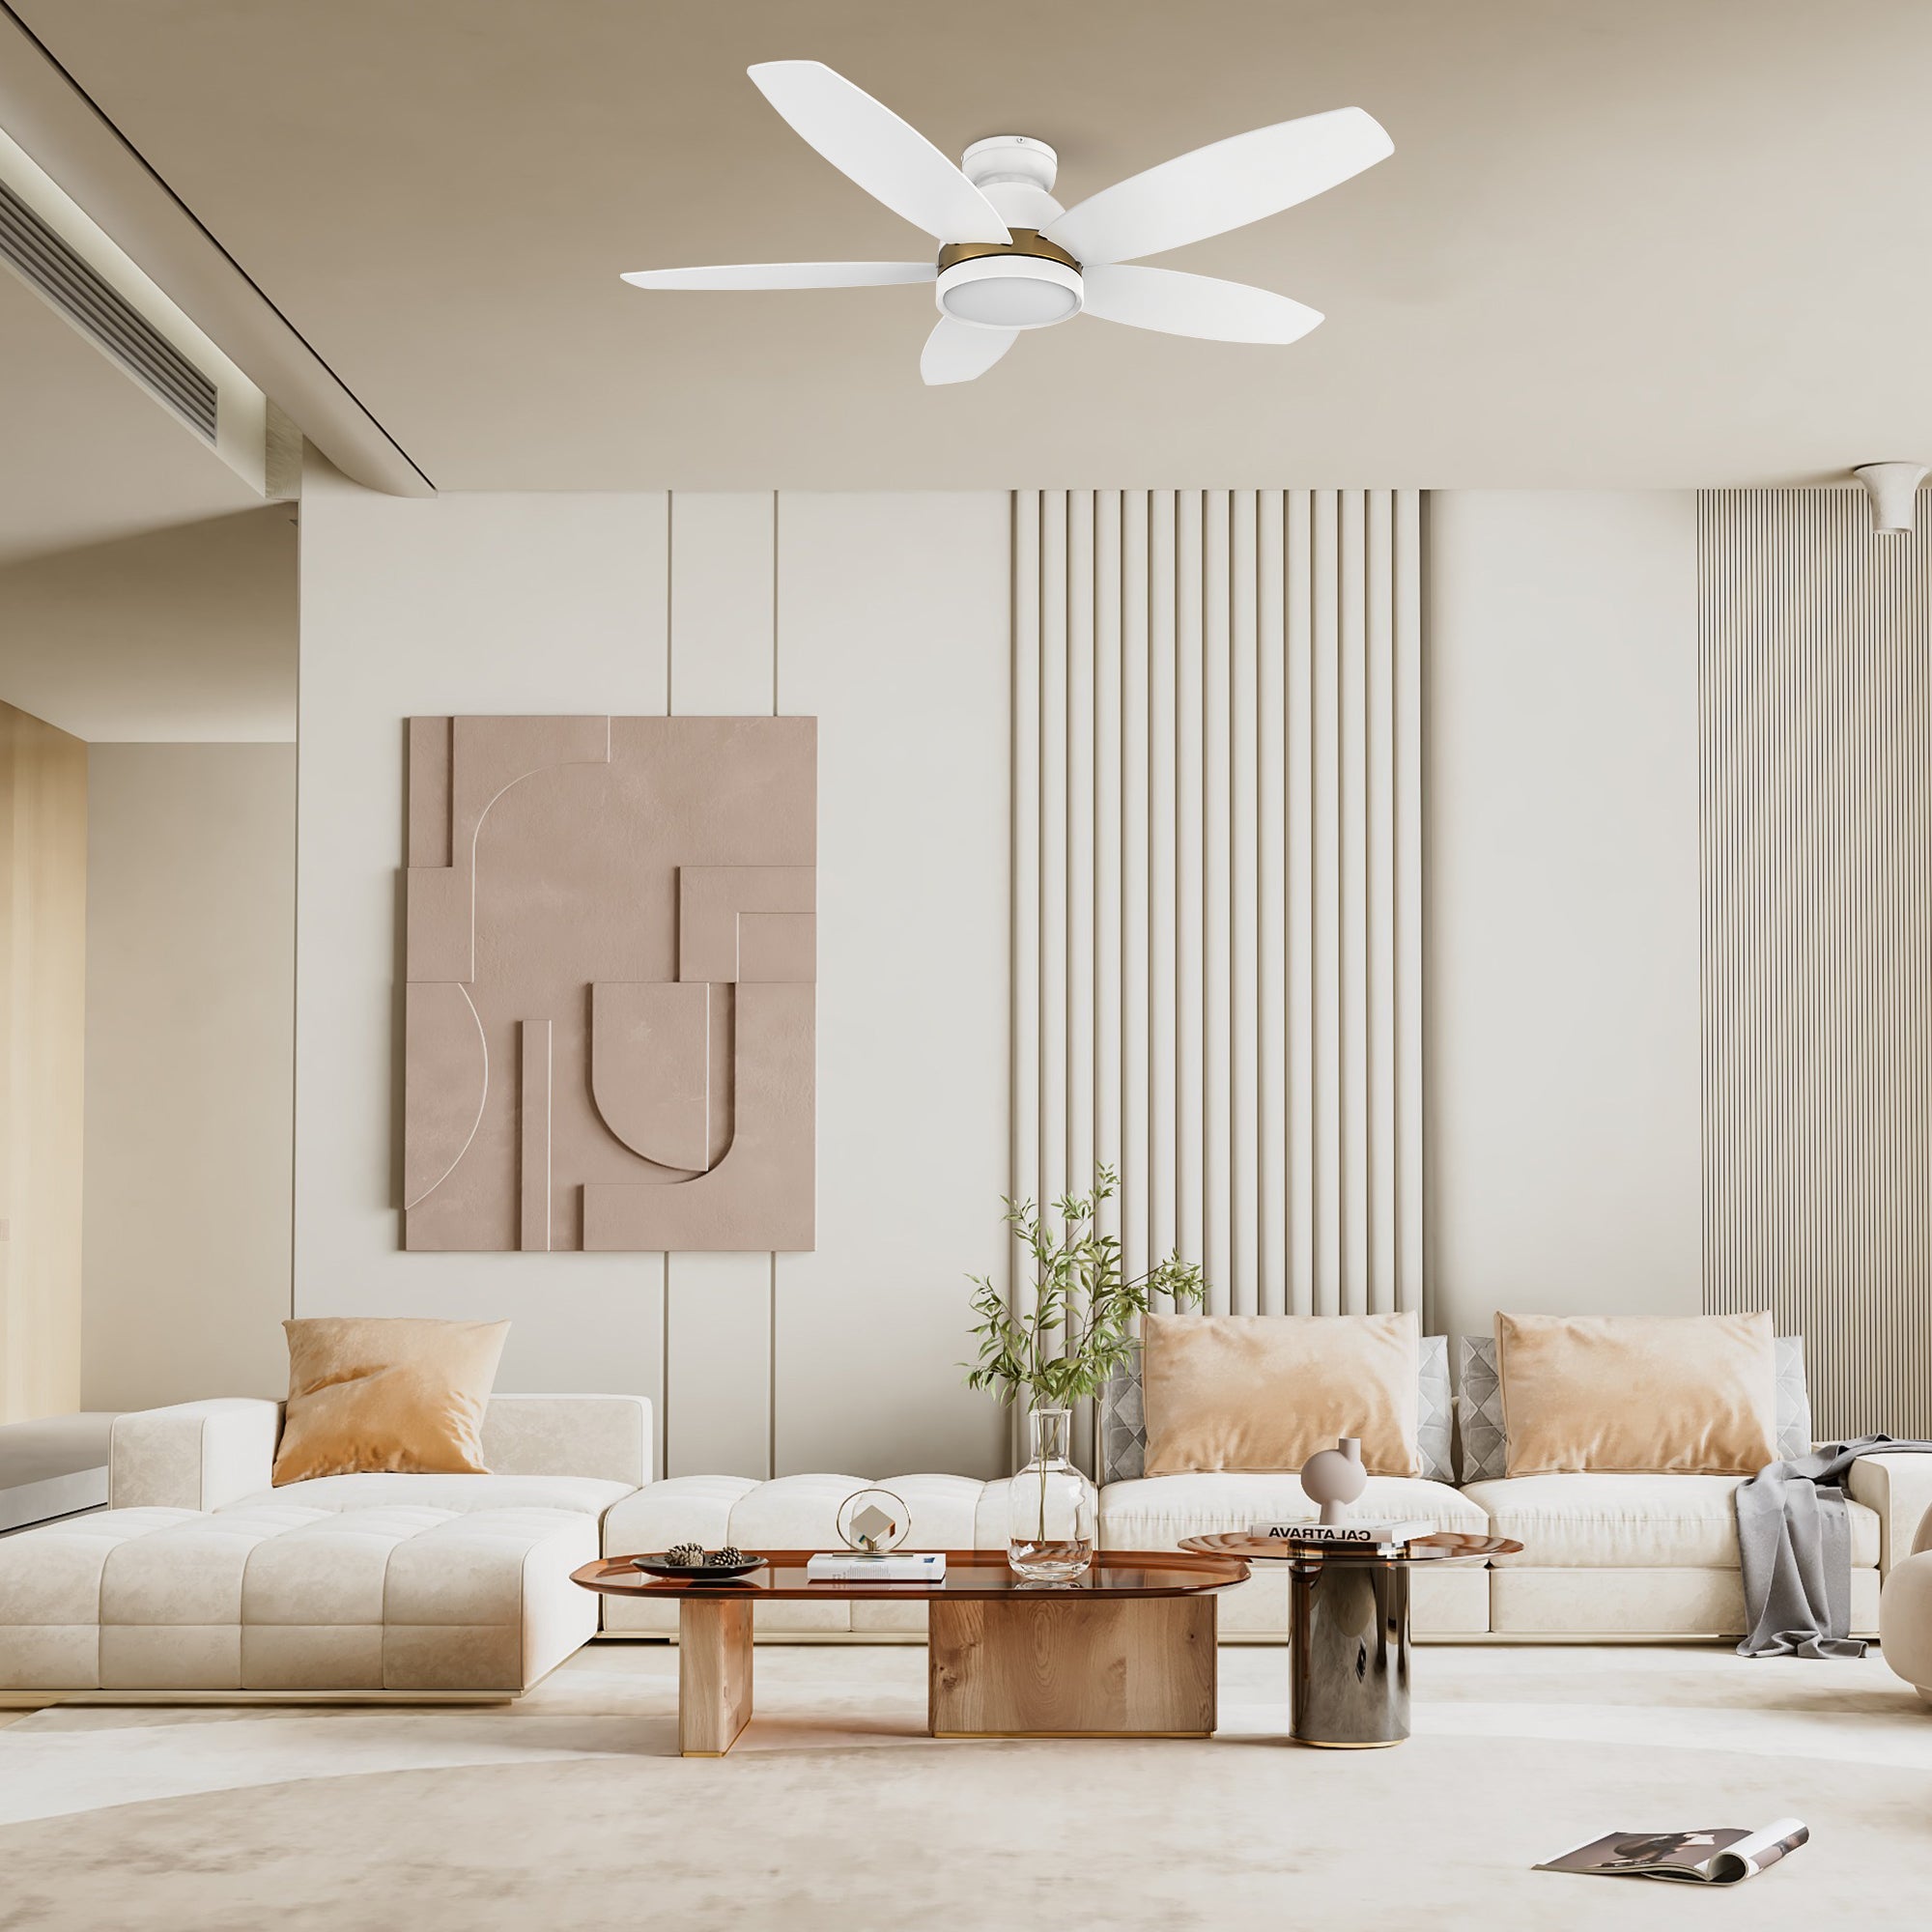 This Levi 48'' smart ceiling fan keeps your space cool, bright, and stylish. It is a soft modern masterpiece perfect for your large indoor living spaces. The fan features Remote control, Wi-Fi apps, Siri Shortcut and Voice control technology (compatible with Amazon Alexa and Google Home Assistant ) to set fan preferences. #color_White